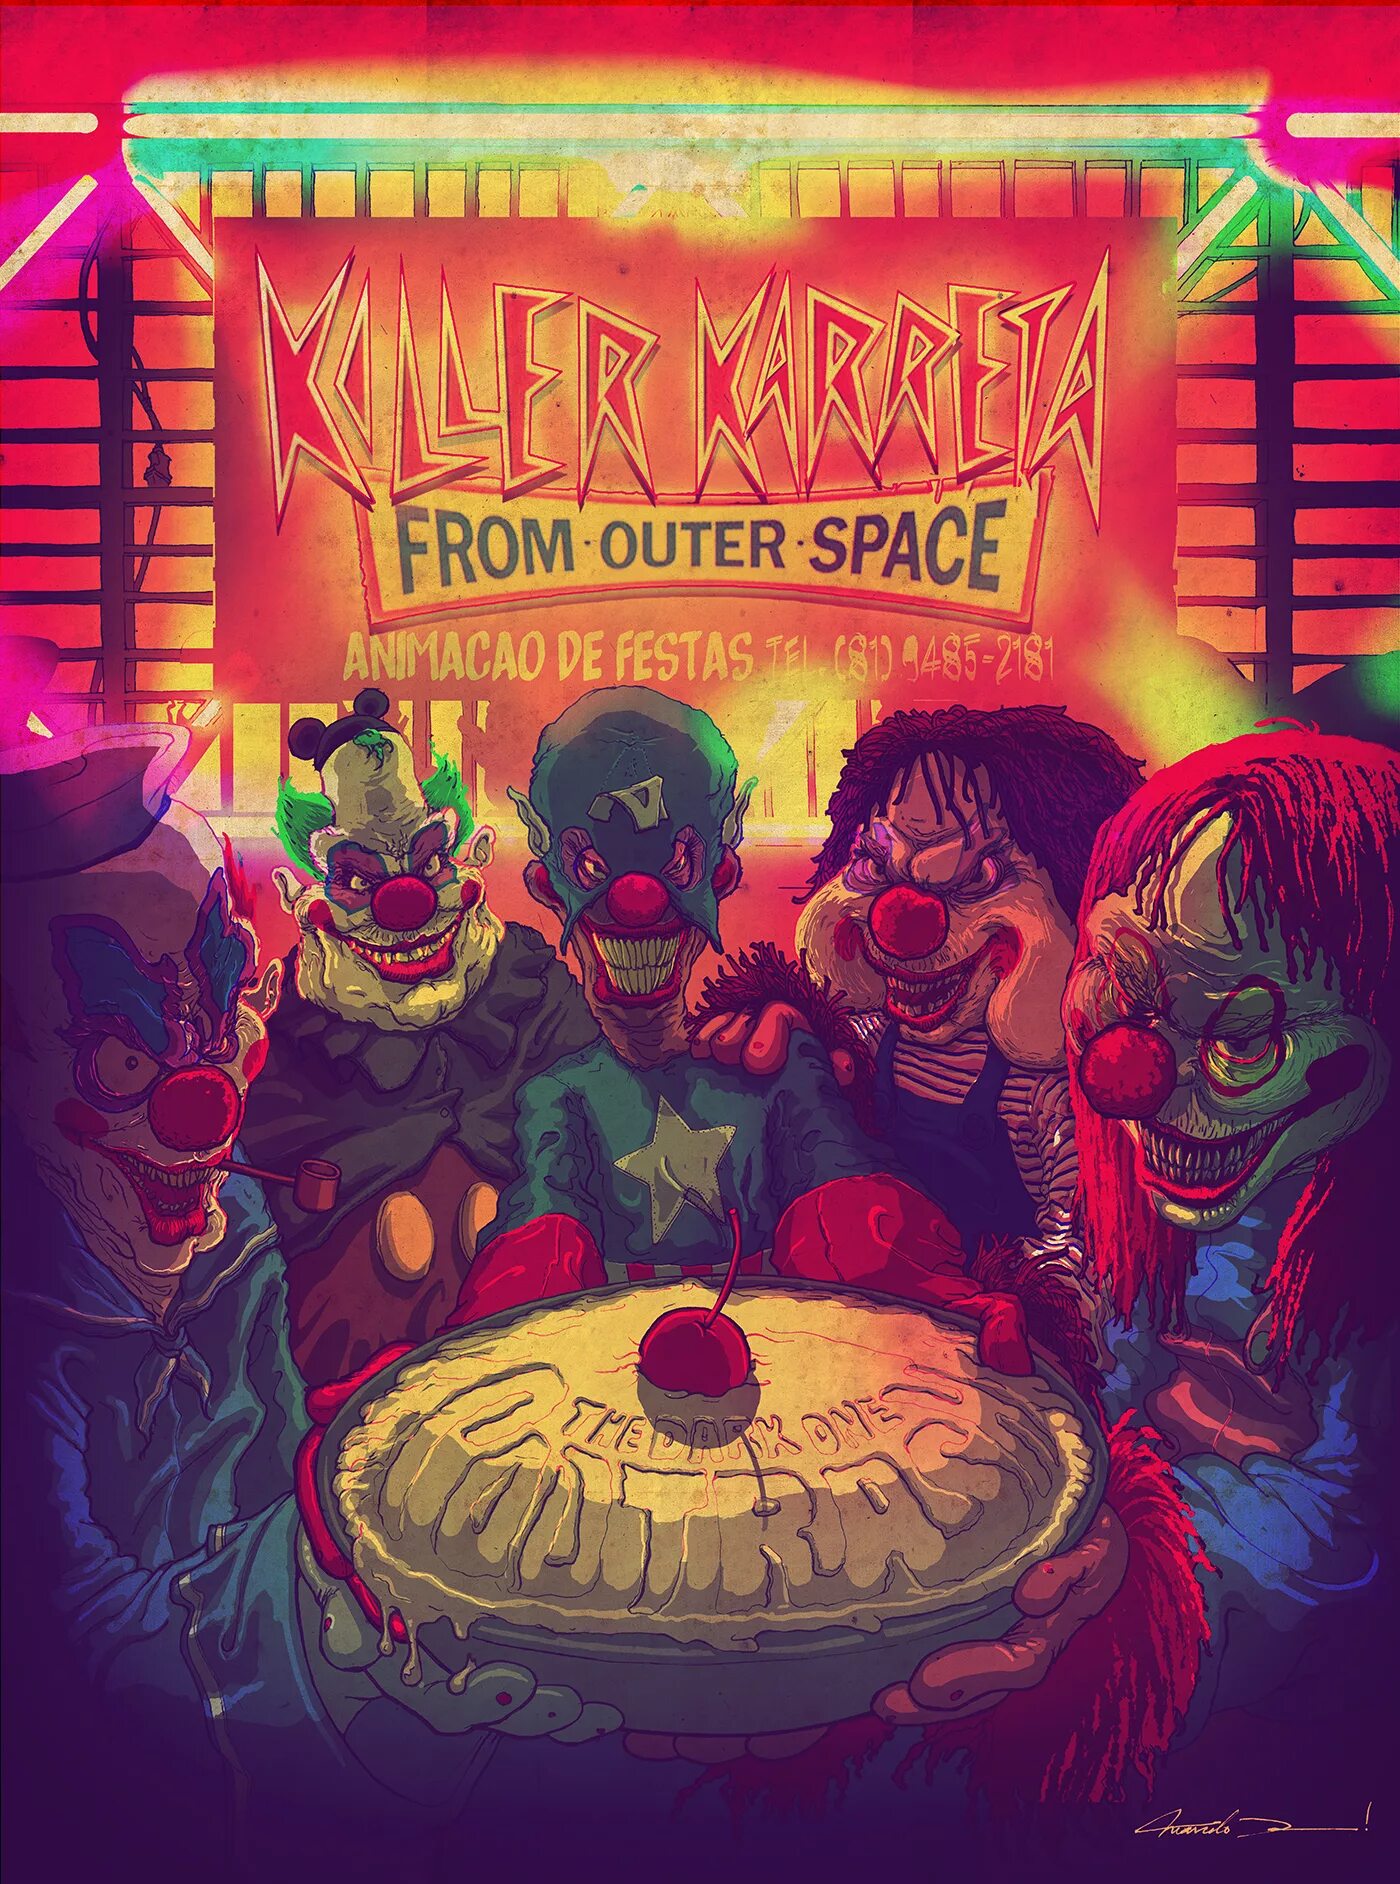 Killer Klowns from Outer Space 1988. Клоуны убийцы из космоса Постер. Killer Klowns from Outer Space. Killer Klowns from Outer Space the game.